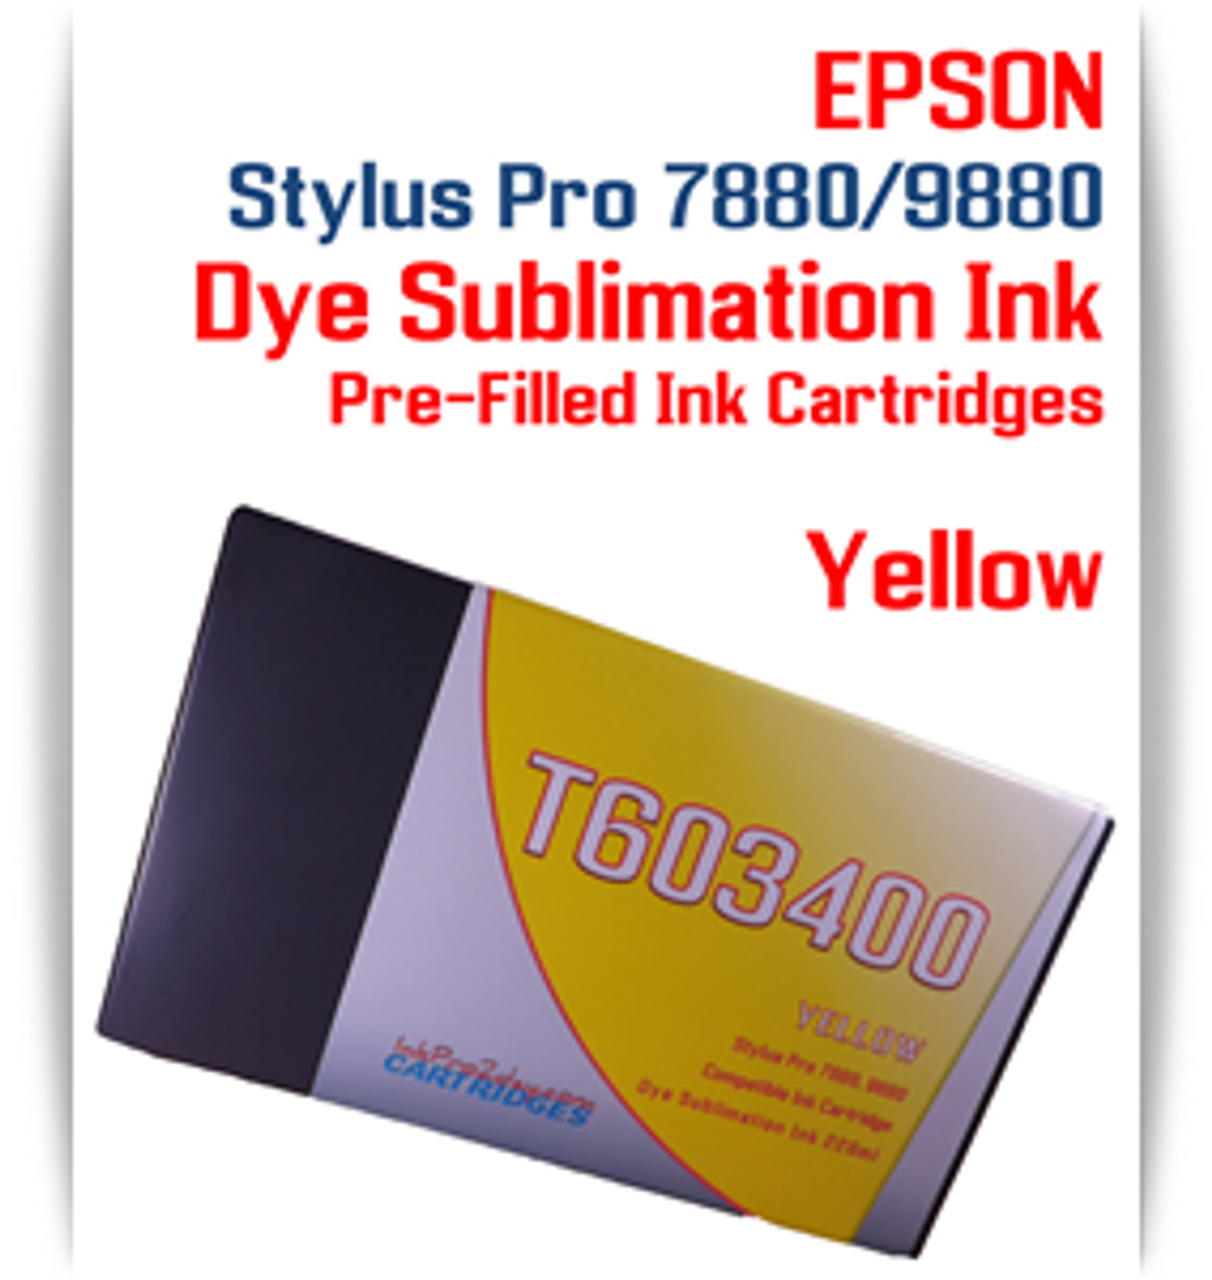 Yellow Epson Stylus Pro 7880/9880 Pre-Filled with Dye Sublimation Ink Cartridge 220ml